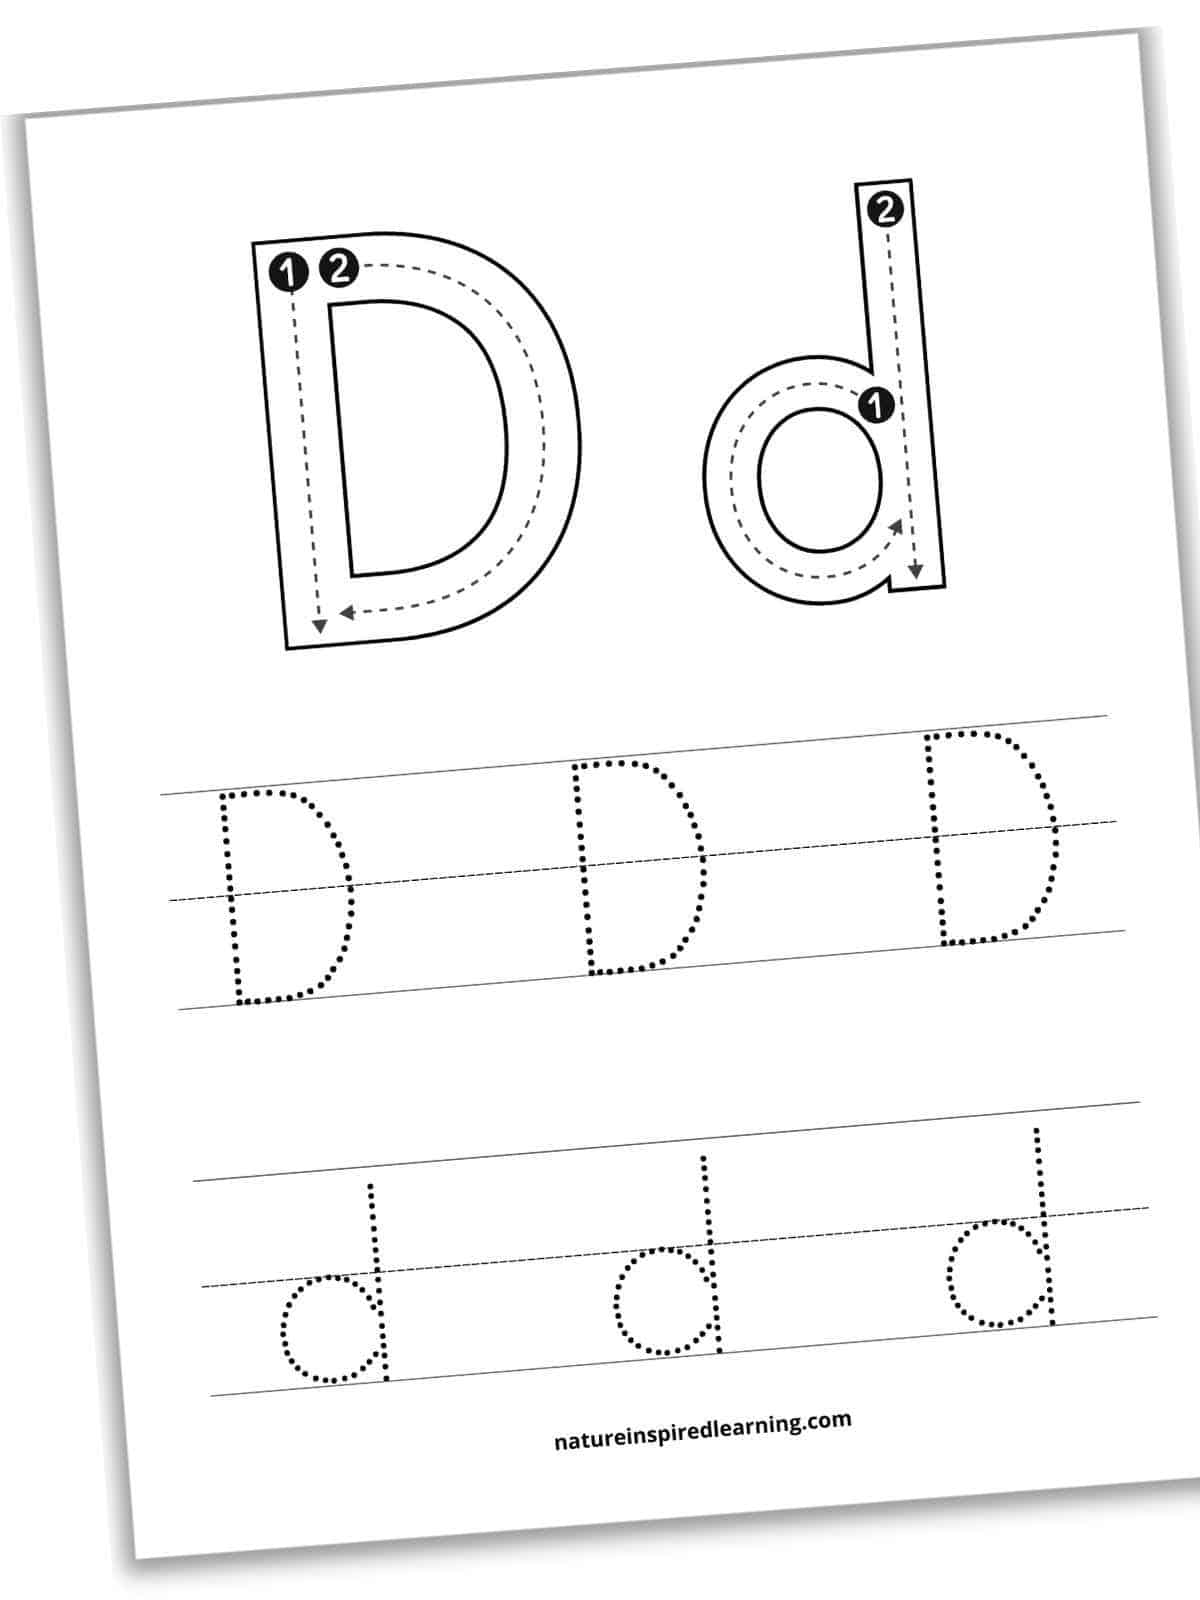 Large letter D and d with guide lines, arrows, and numbers for letter formation across top of worksheet. Bottom half has two set of lines with three traceable letter D's on the first set and 3 d's on the second set. Printable slanted with a drop shadow.